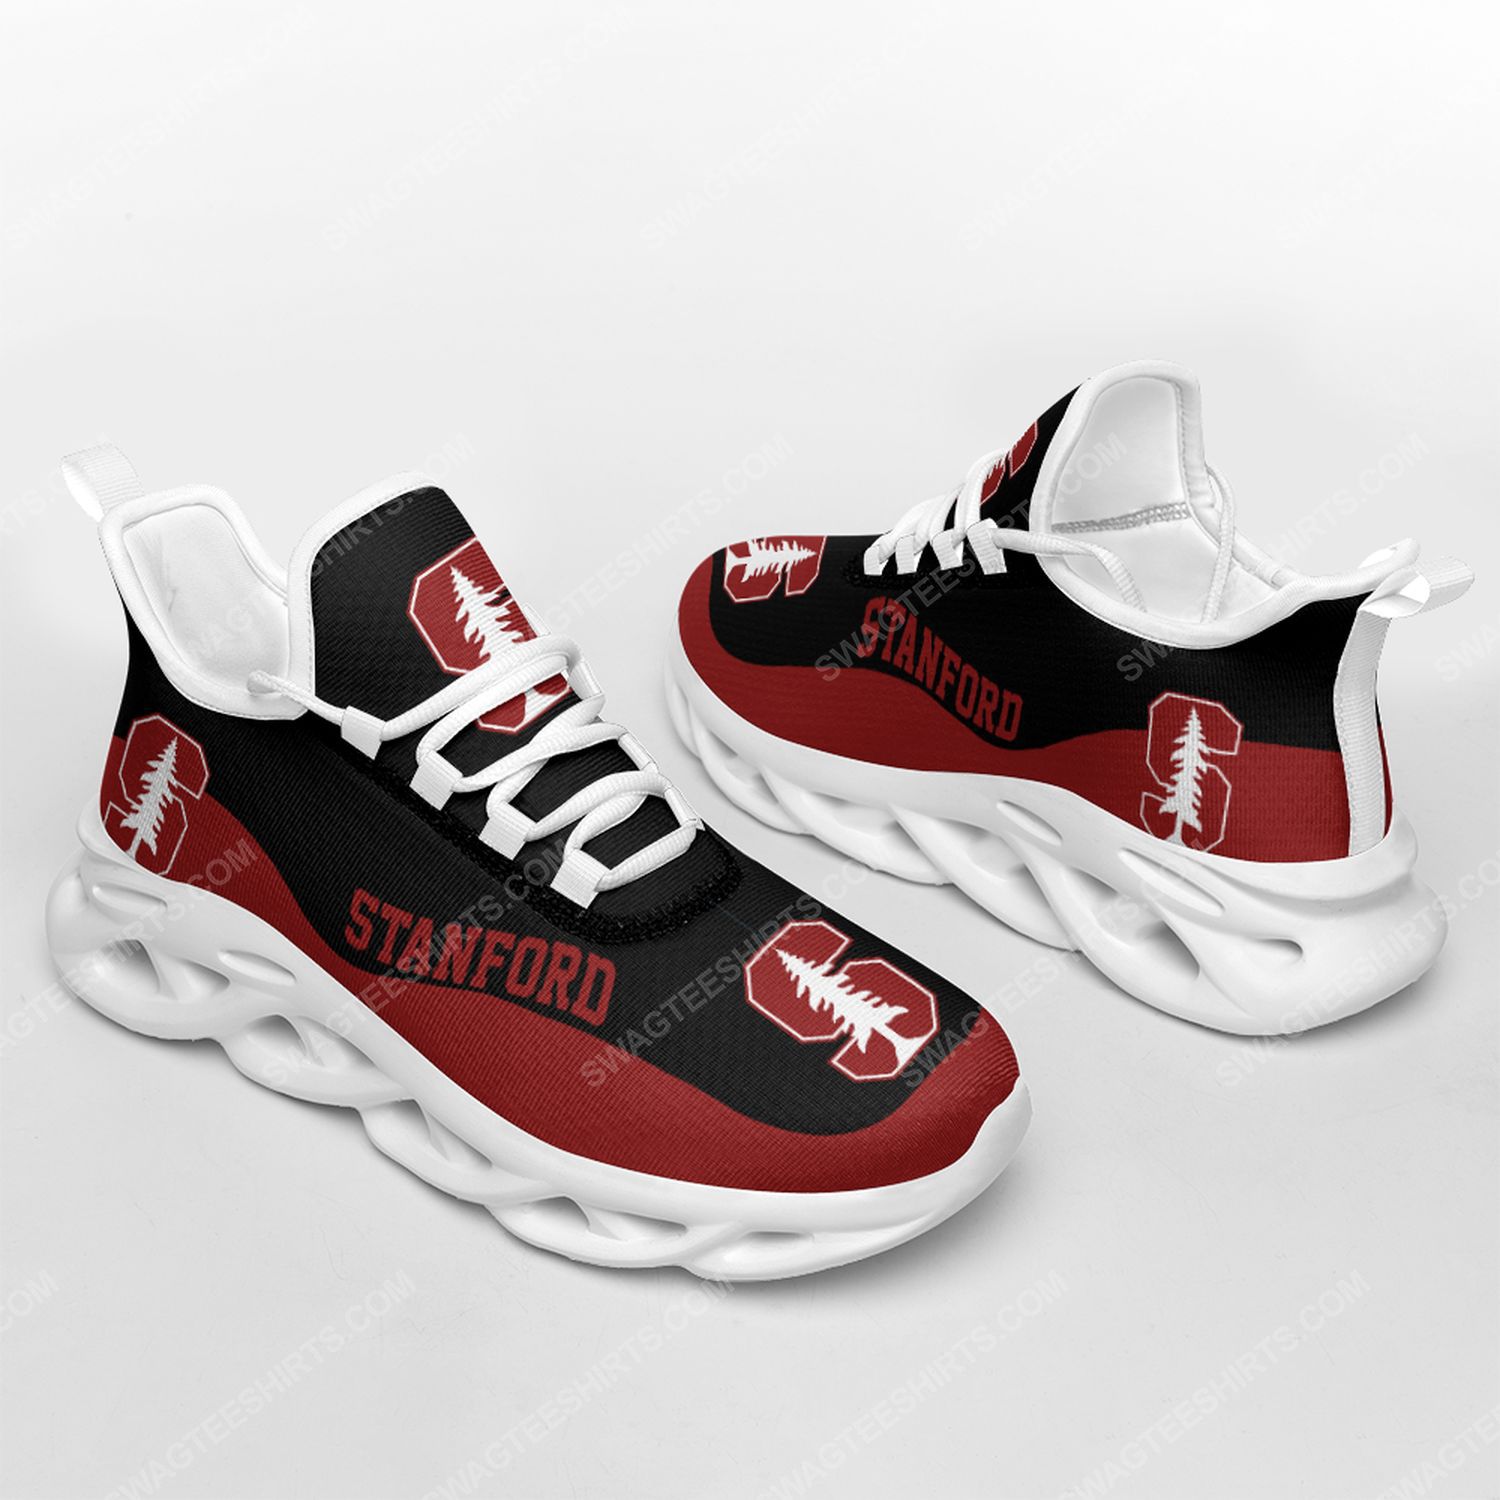 The stanford cardinal football team max soul shoes 2